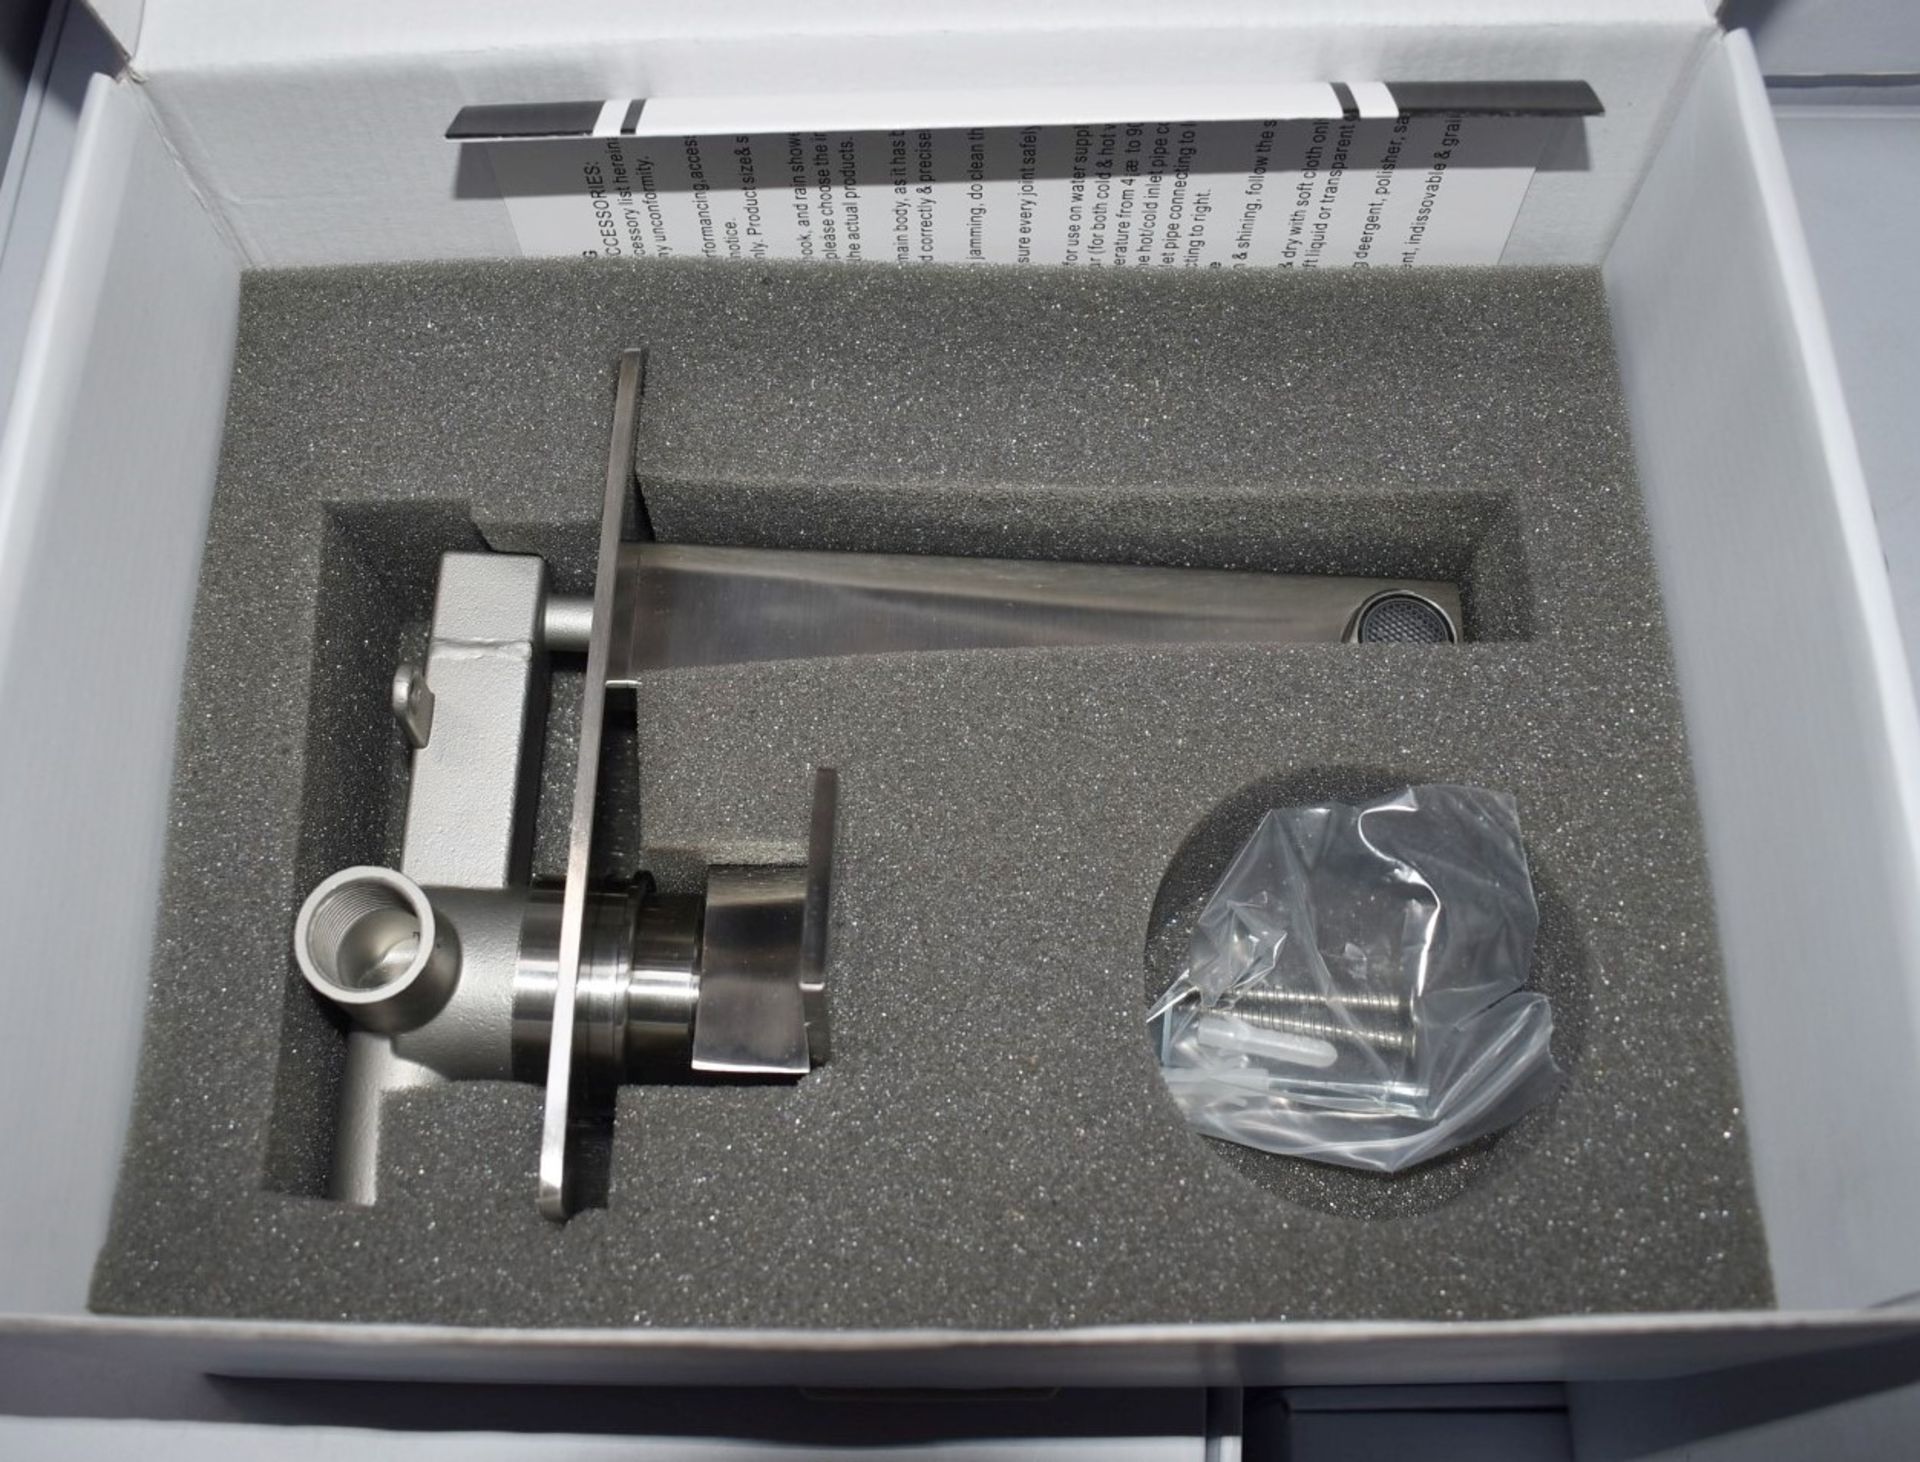 1 x Stonearth 'Metro' Stainless Steel Wall Mounted Tap - Brand New & Boxed - RRP £345 - Ref: TP823 - Image 9 of 9